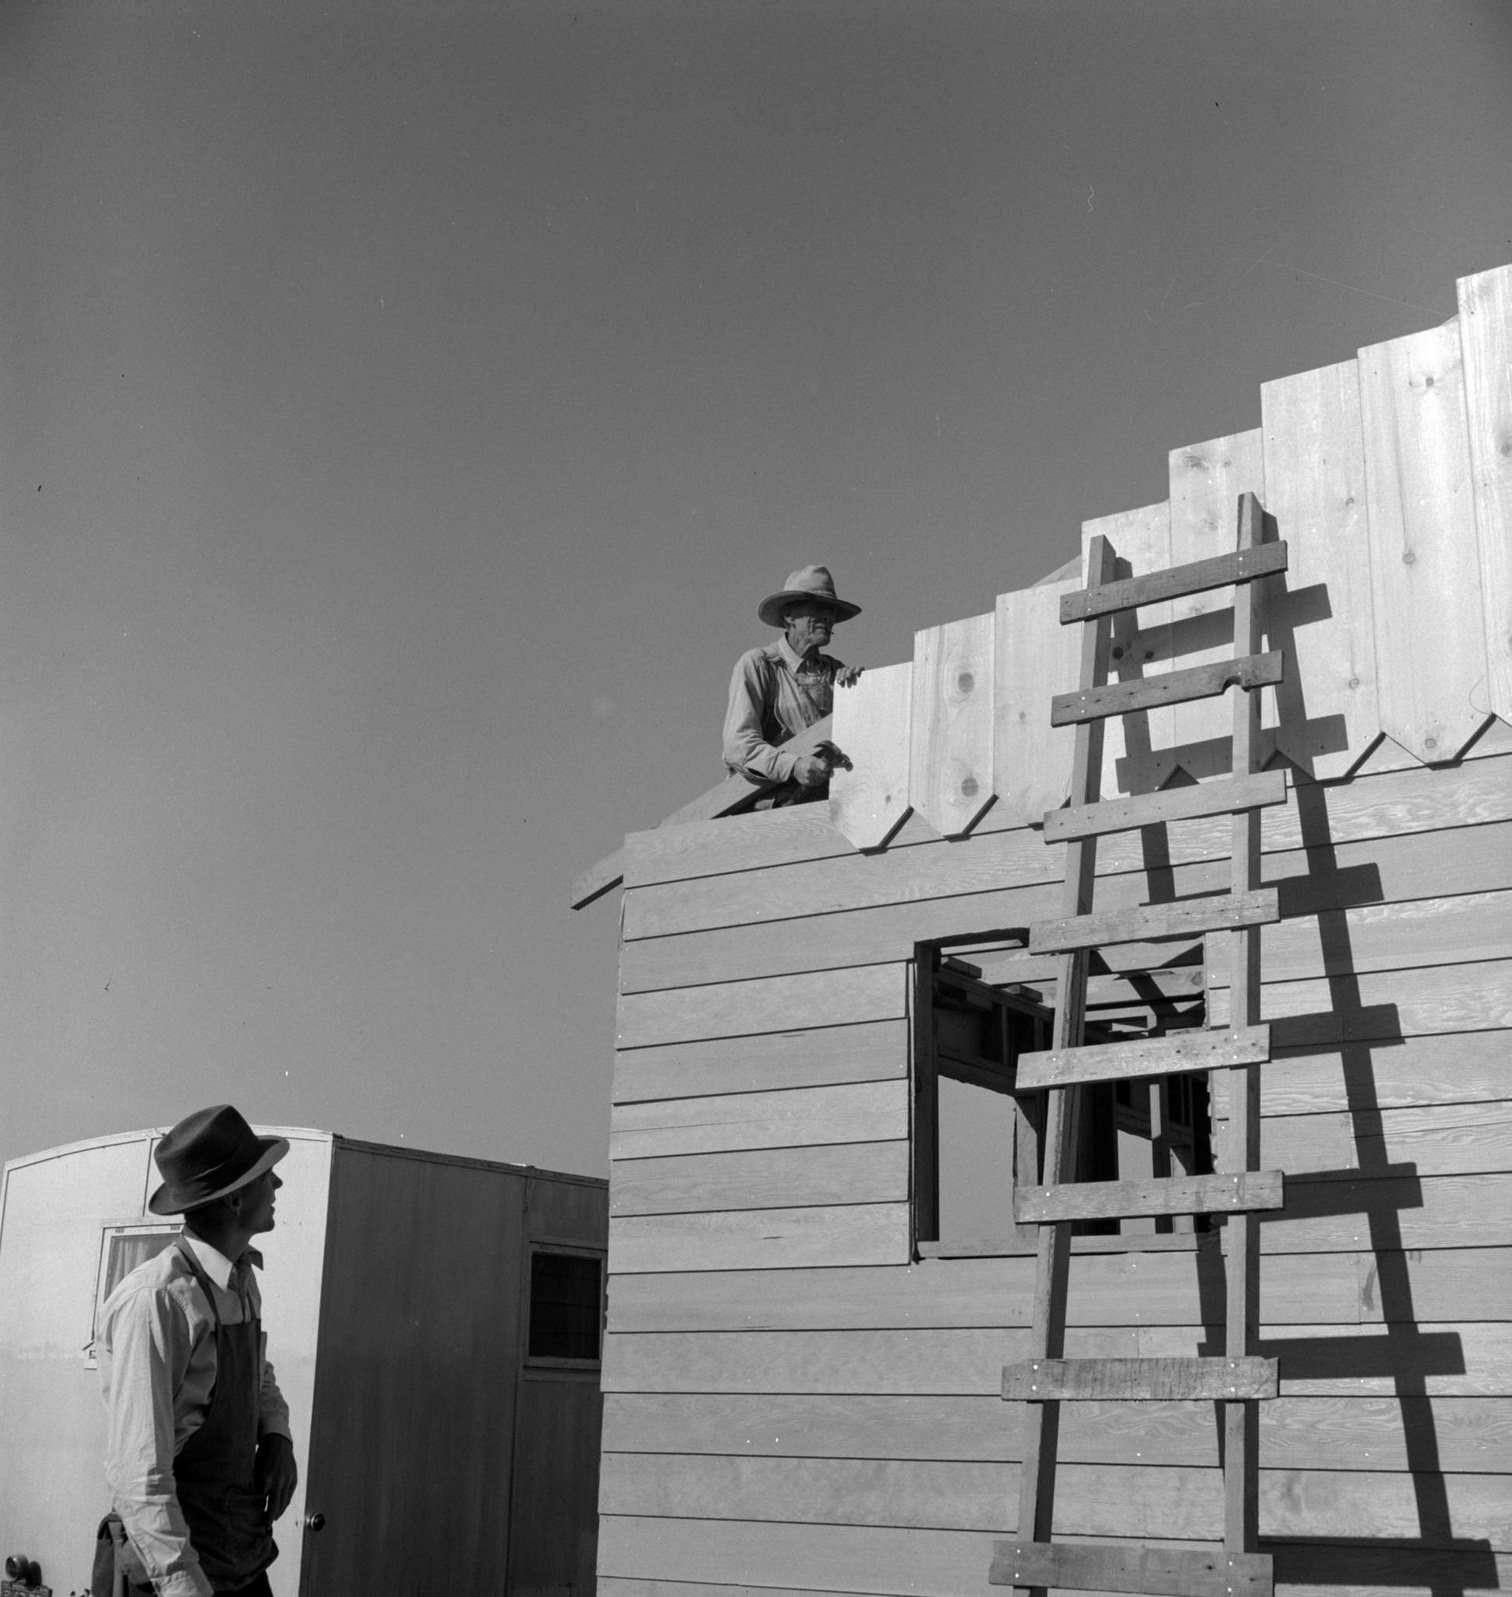 Father and son, recent migrants to California, building house in rapidly growing settlement of lettuce workers on fringe of town, 1930s